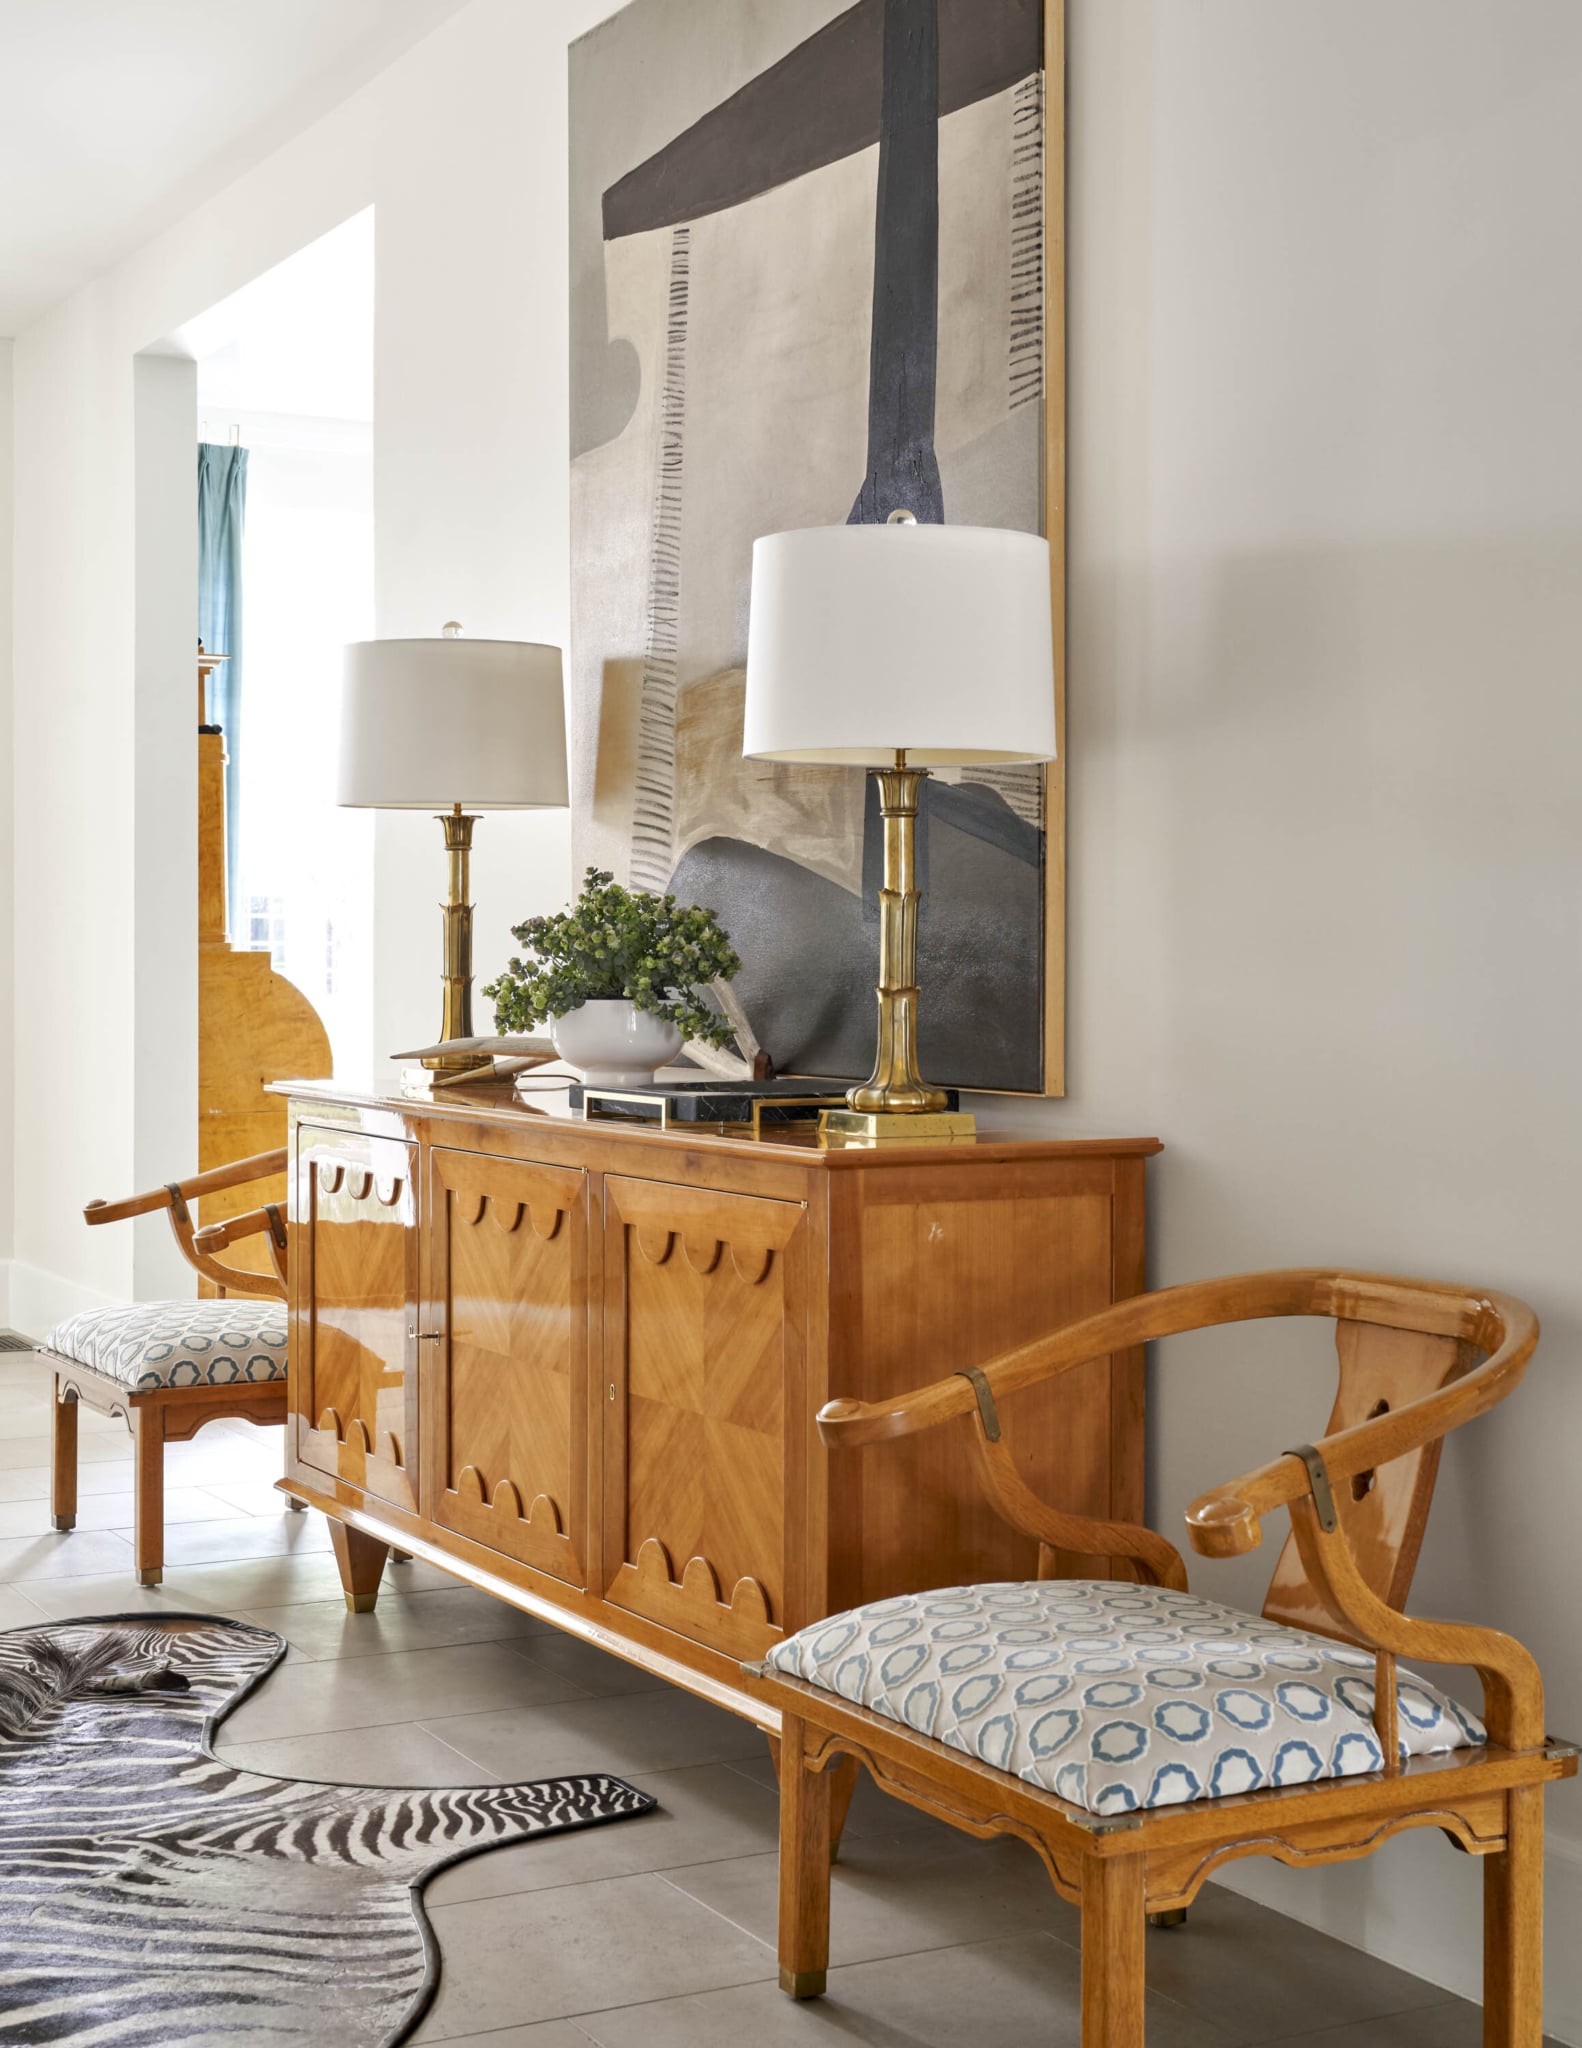 Mary Beth Wagner Interiors - Nathan Schroder Photography - abstract art in foyer -memorable entry - pair of lamps - pair of chairs - zebra rug